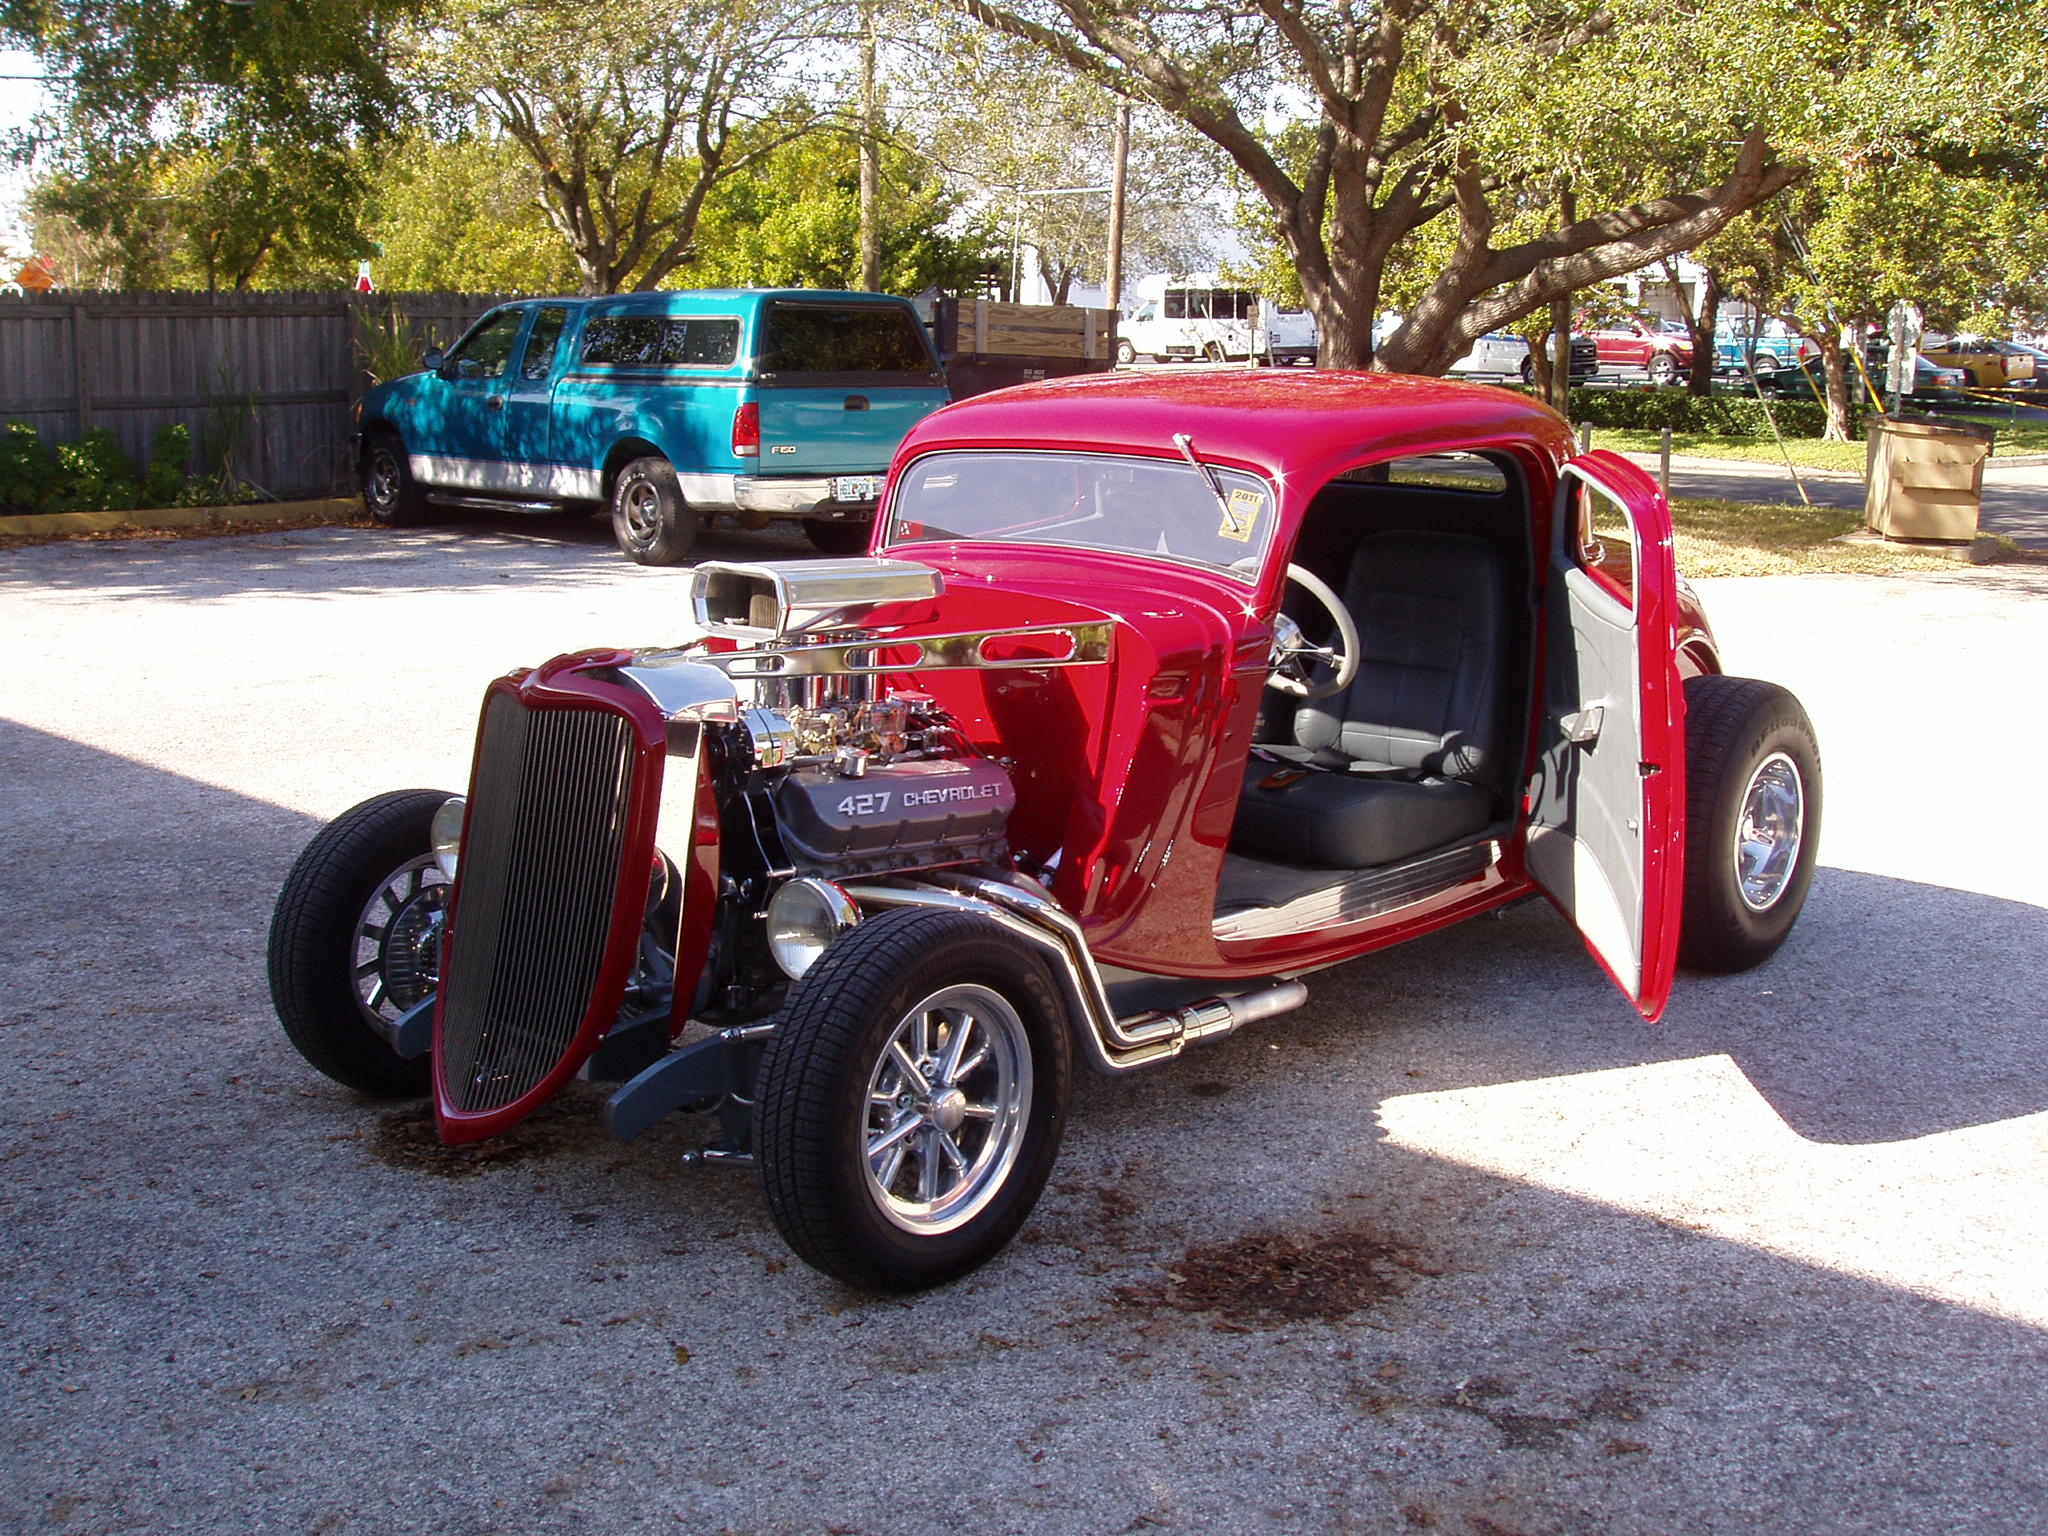 CHIP'S 1934 FORD